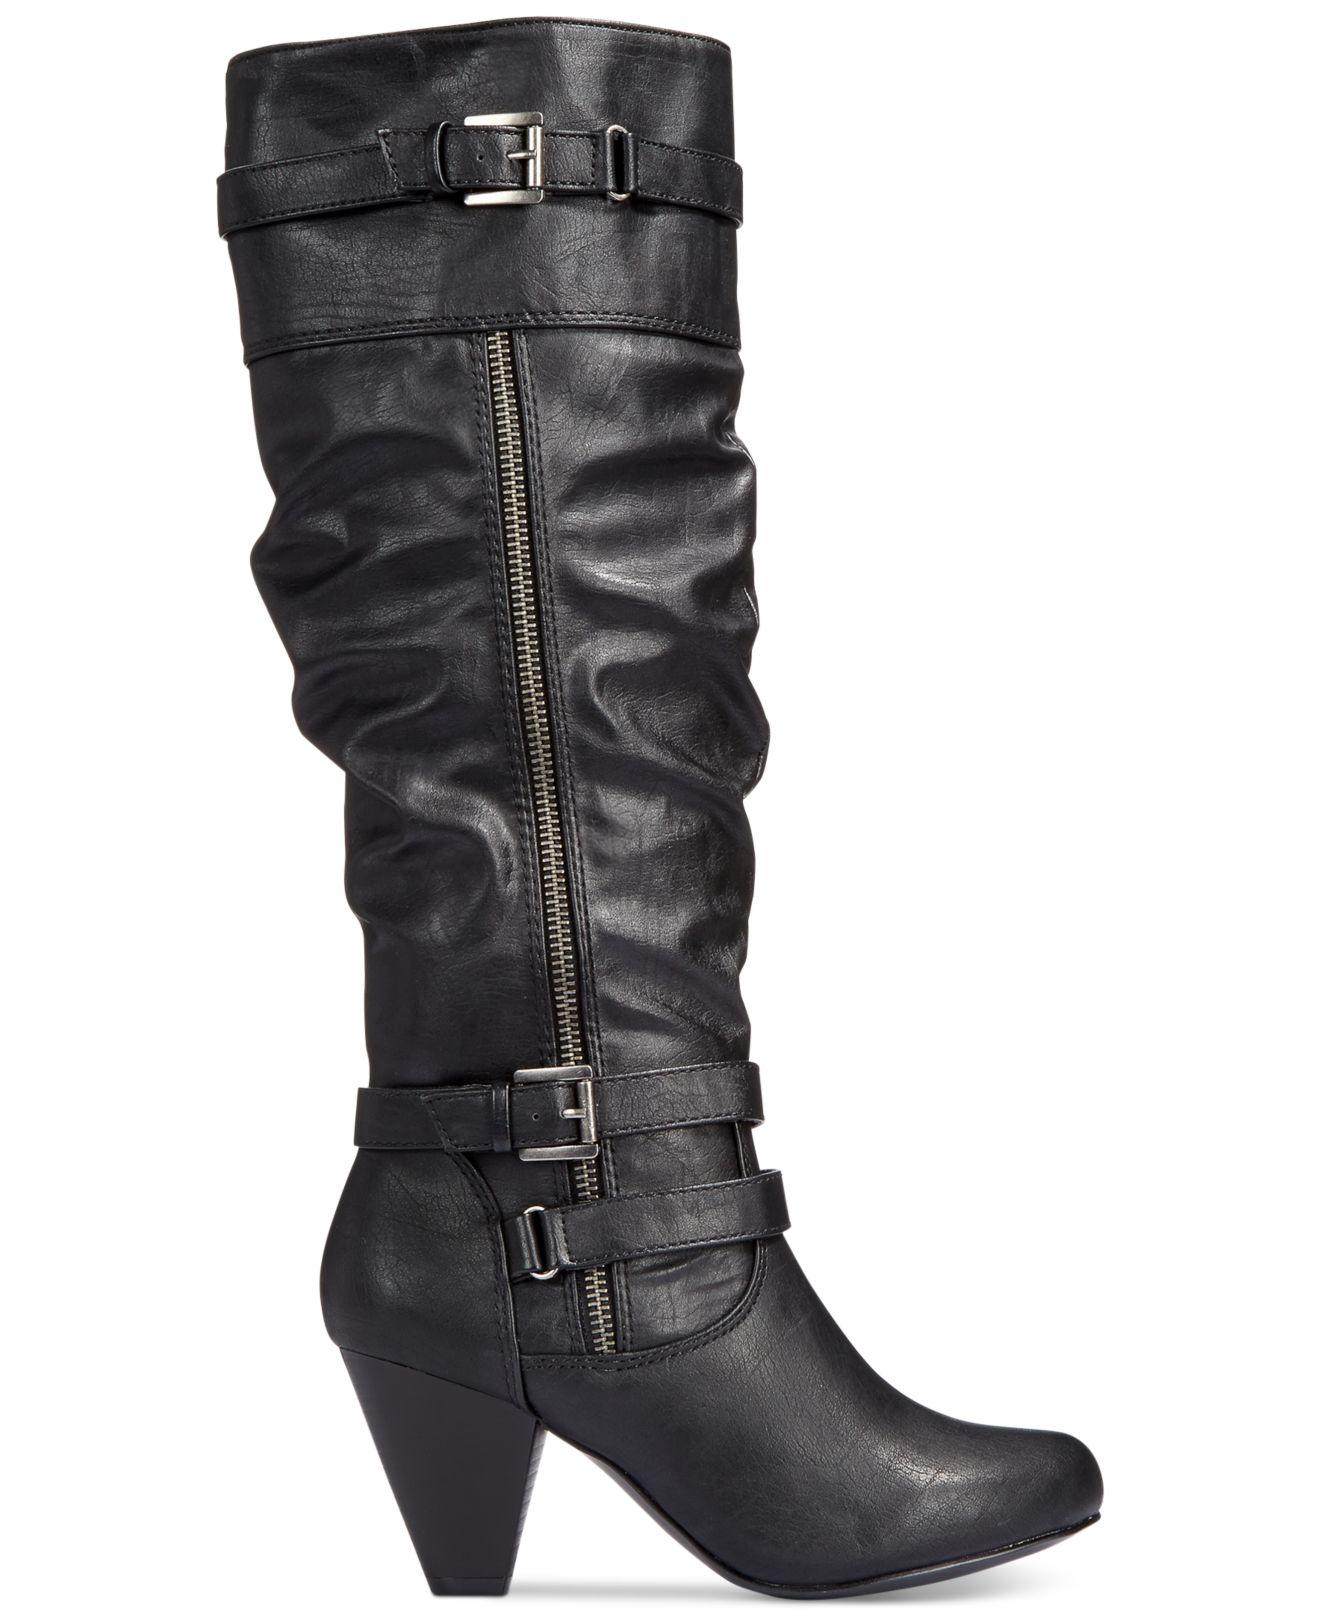 Lyst - Rampage Eliven Slouchy Leather Boots in Black